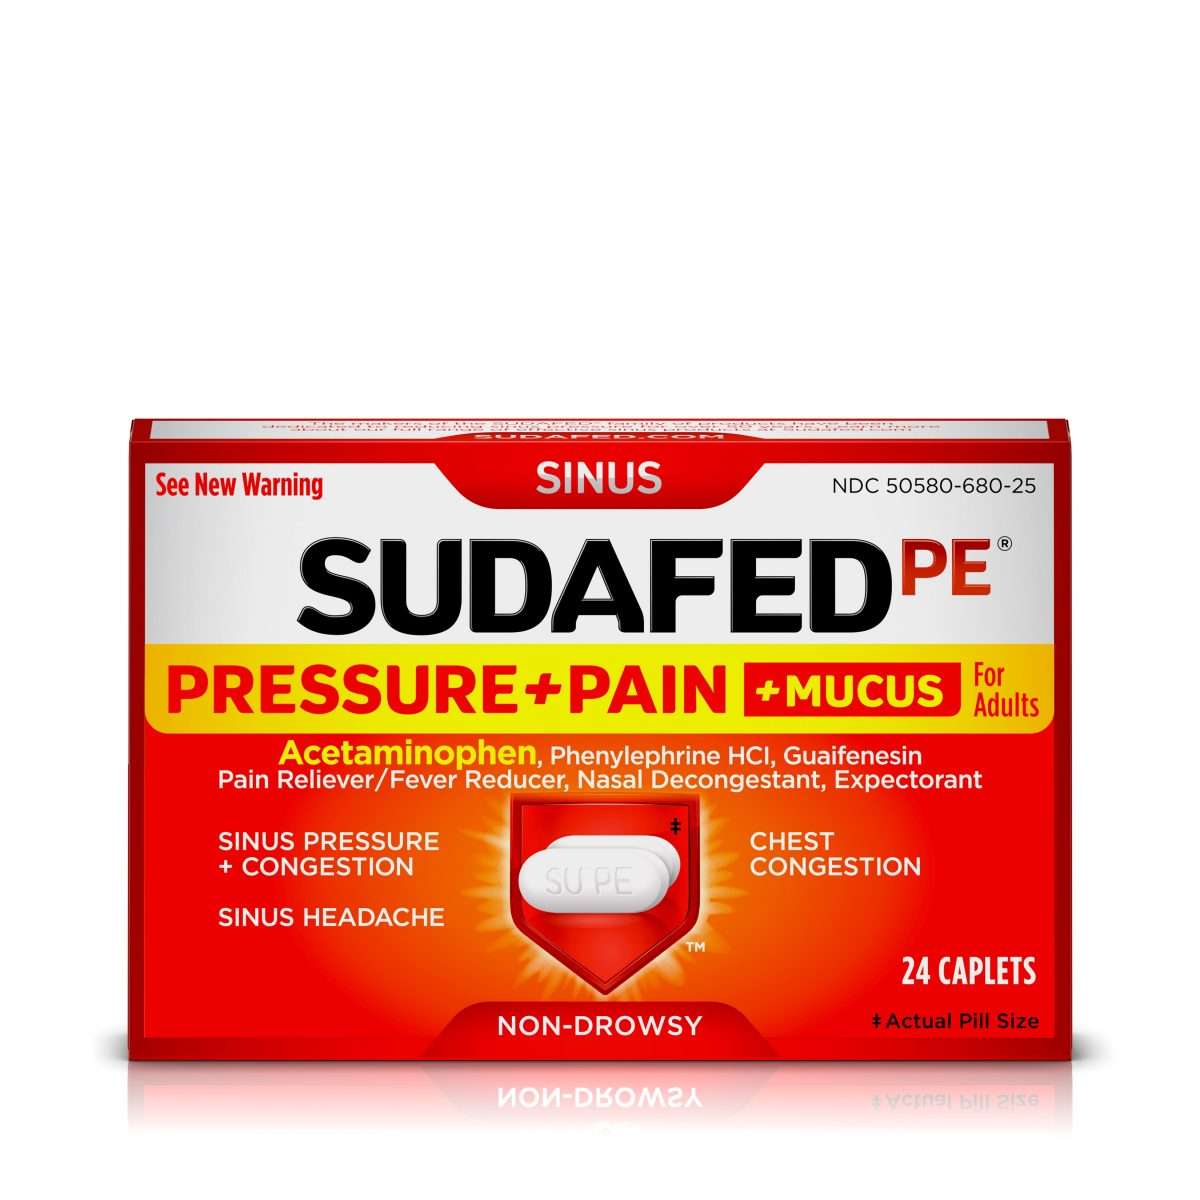 Sudafed PE Sinus Pressure + Pain + Mucus and Congestion Relief, 24 ct ...